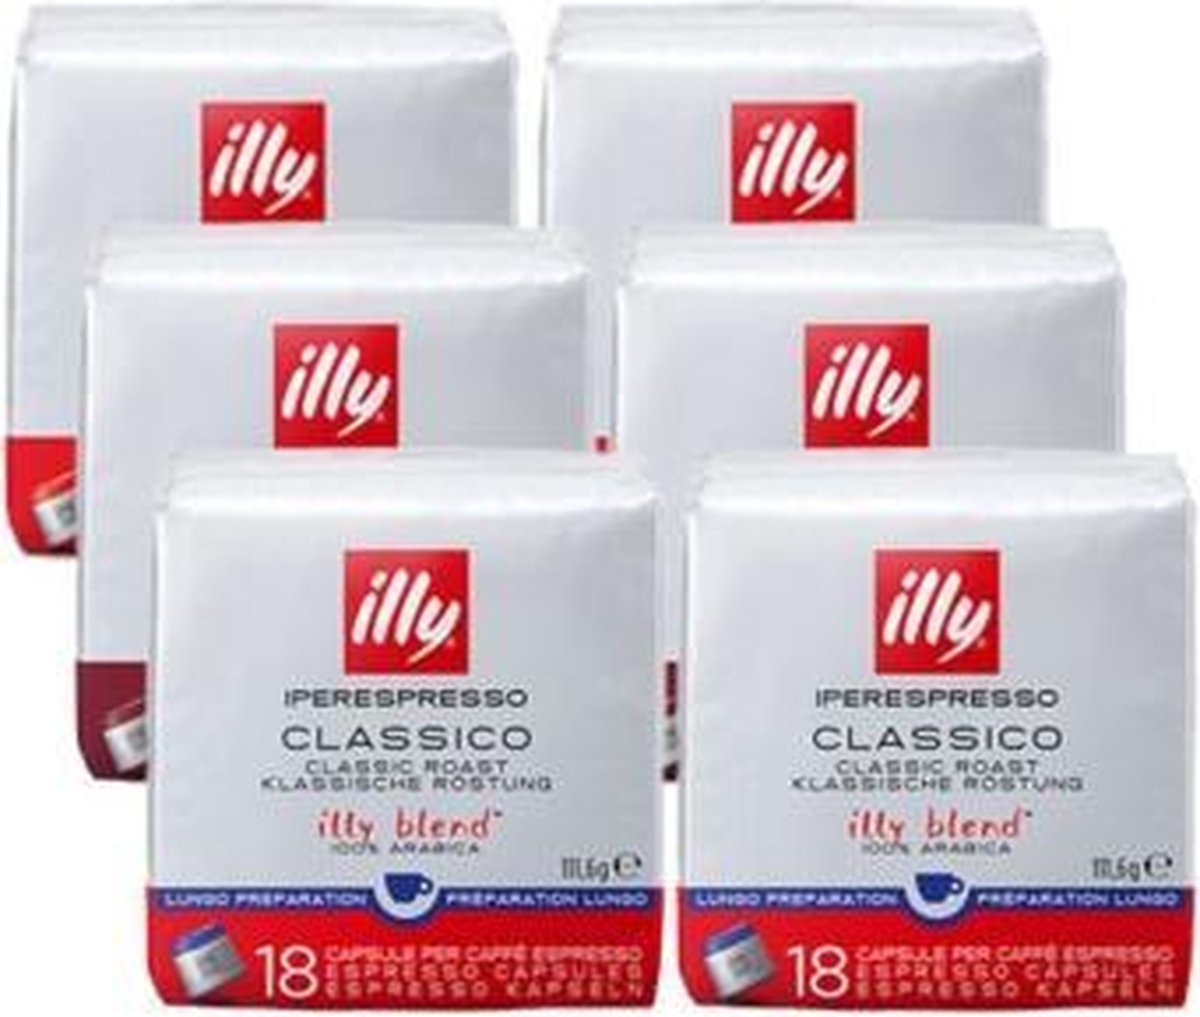 illy - Iperespresso koffie home classico Lungo 6 x 18 capsules - illy